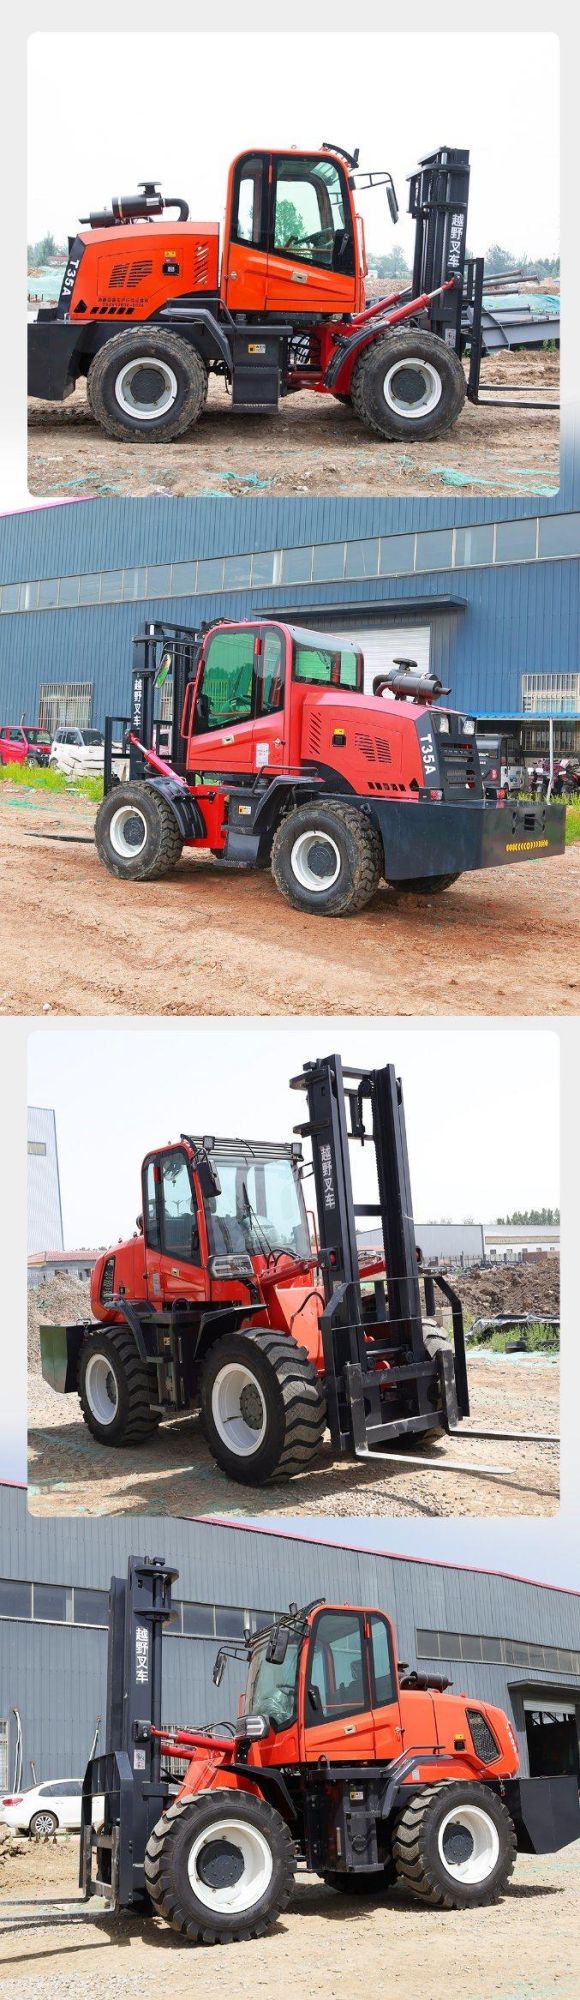 The Factory Uses a Four-Wheel Drive Cross-Country Forklift with a Lift of Four Meters and a Load of Three Tons